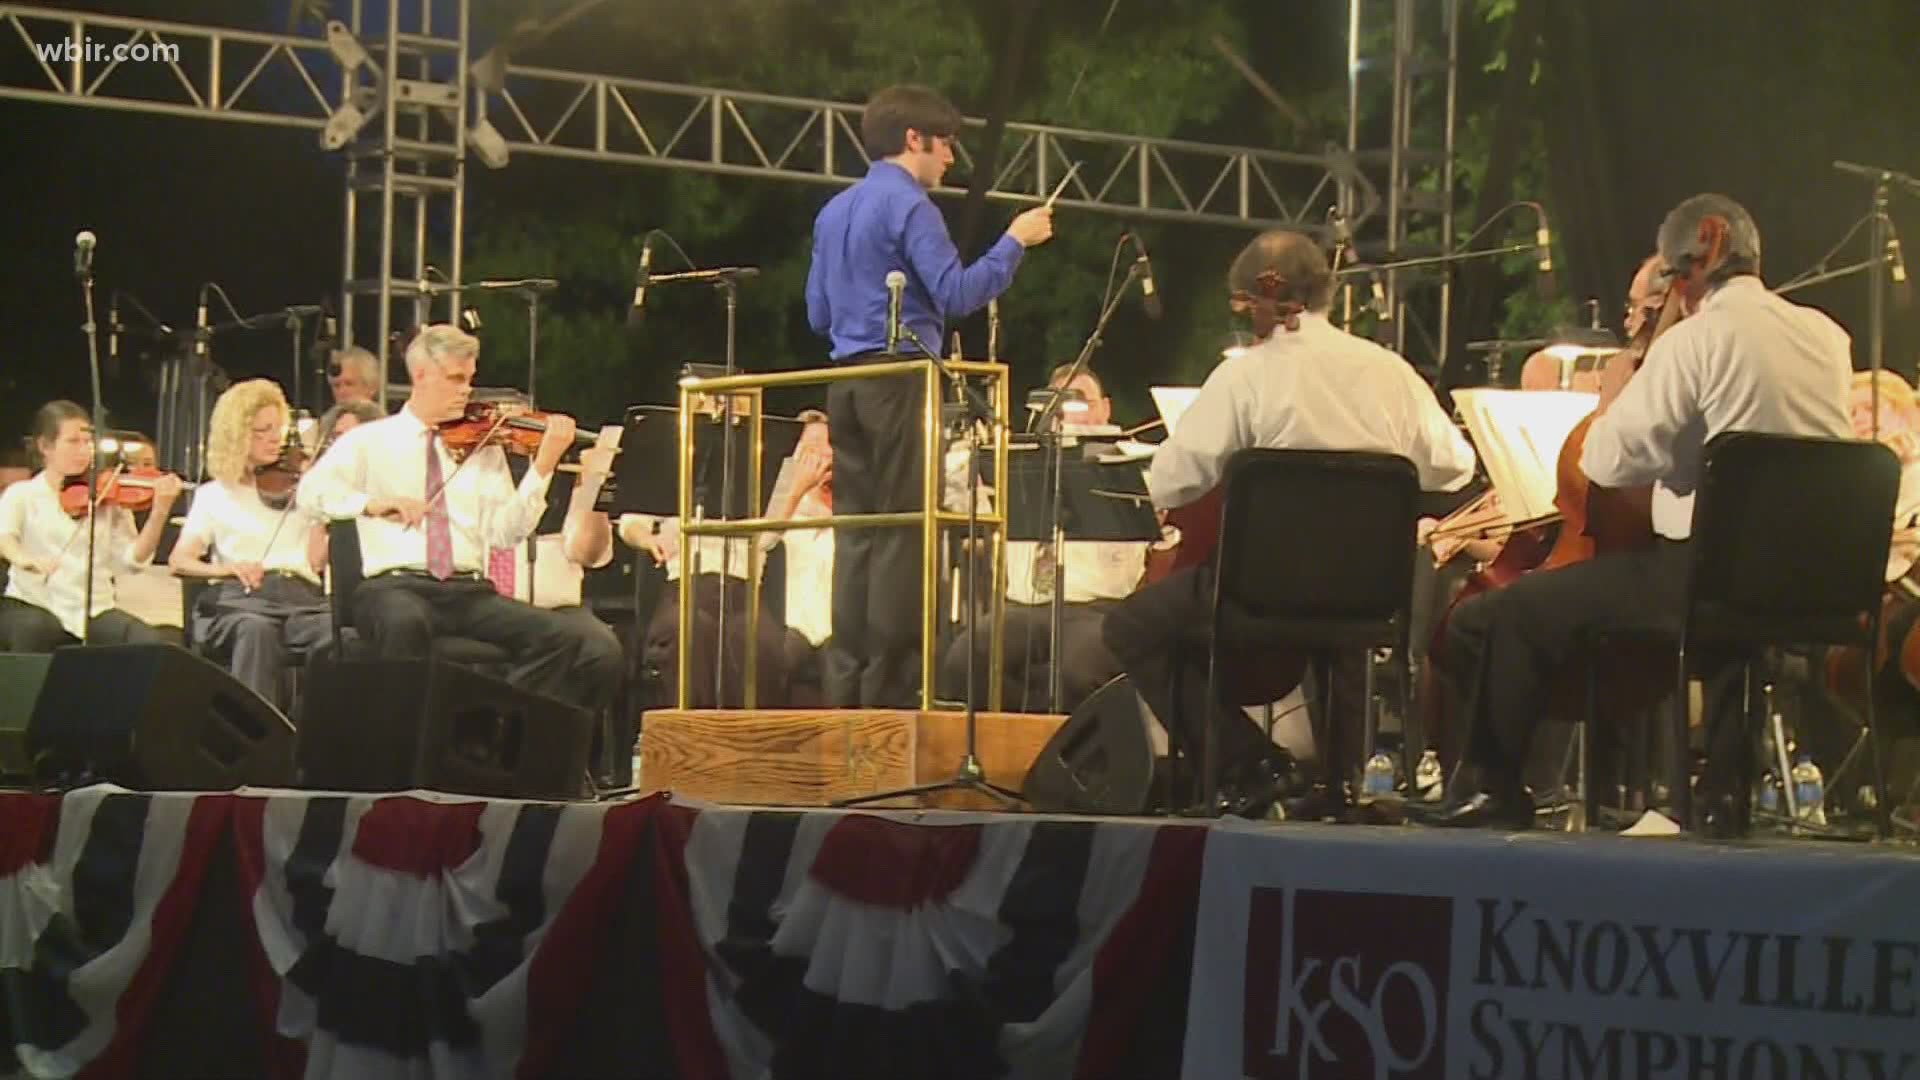 The KSO usually performs as fireworks light up the sky above World's Fair Park, but not this year.